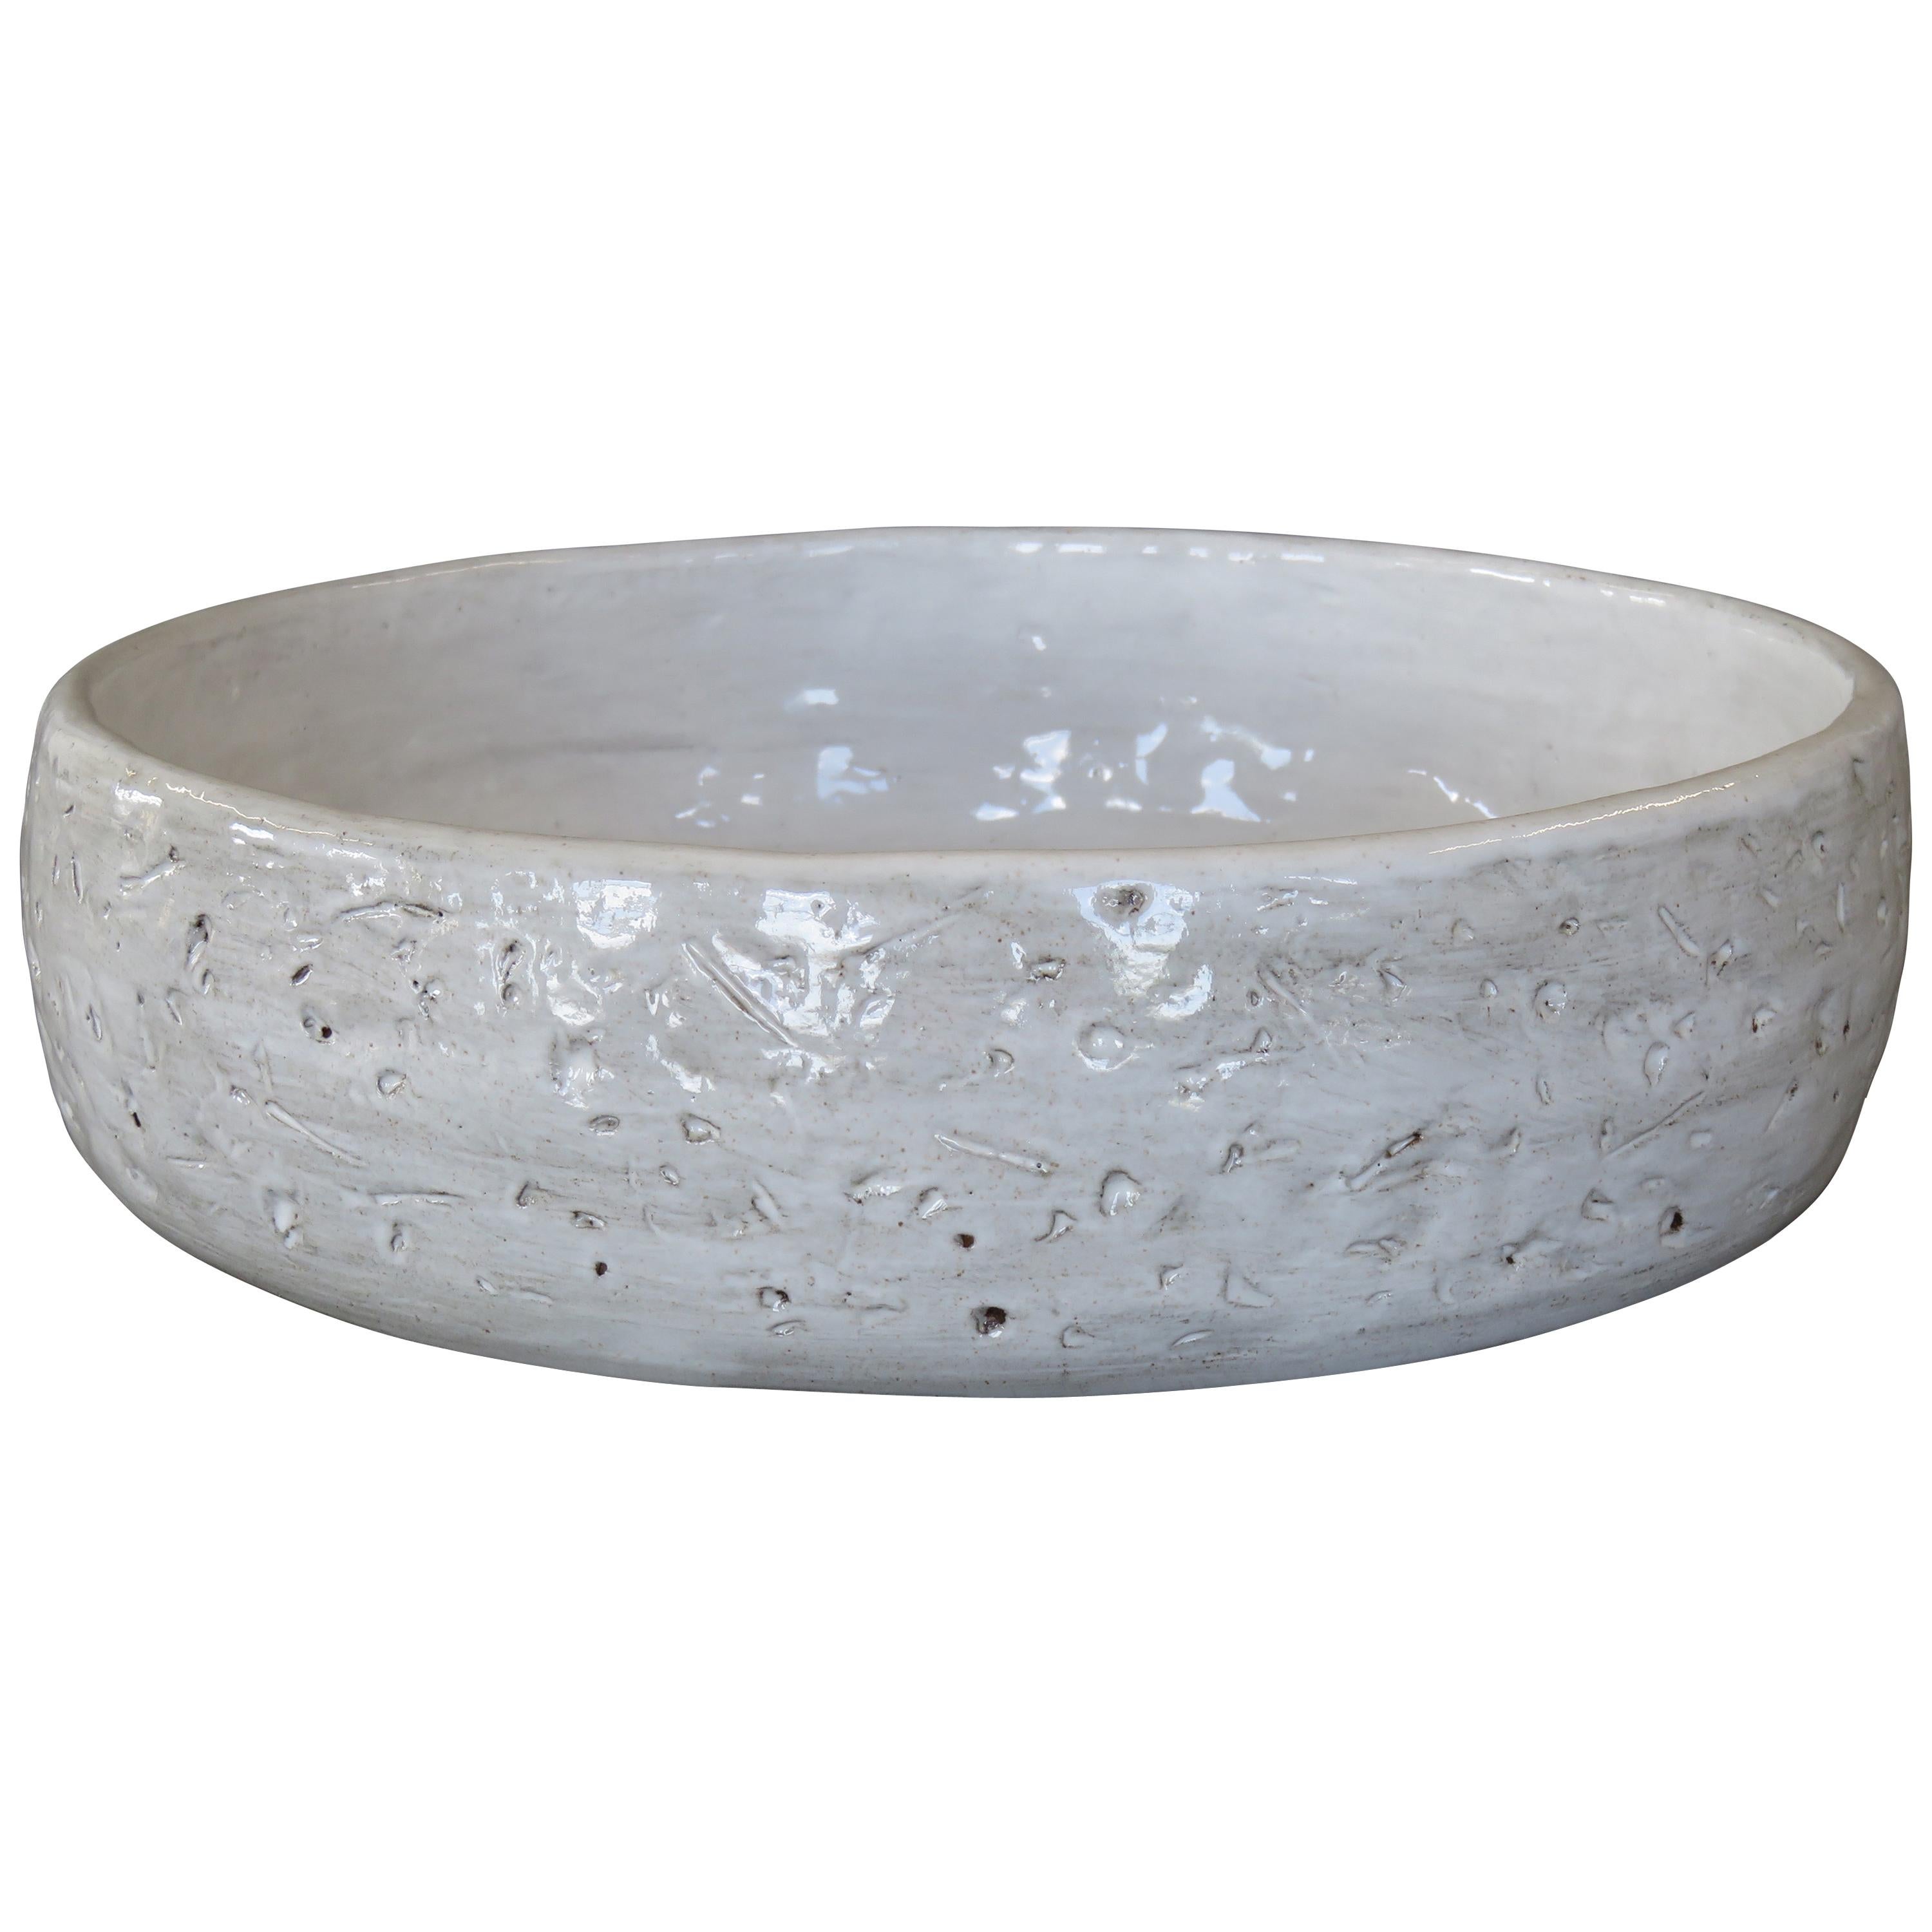 Large Ceramic Serving Bowl, Hand-Marked Exterior With White Glaze, Hand Built